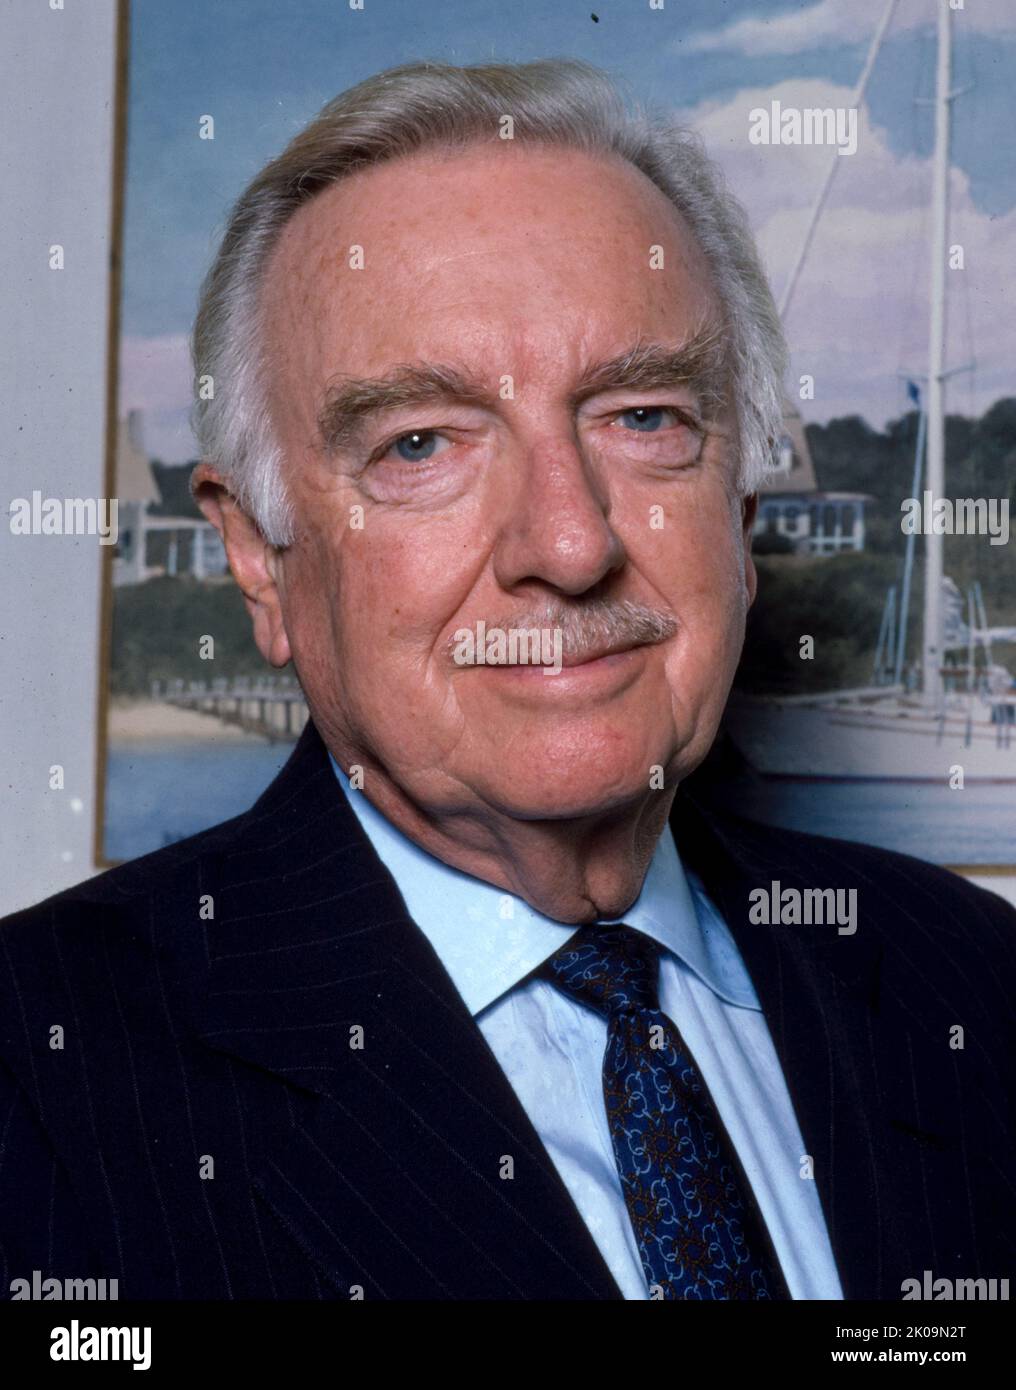 Walter Leland Cronkite Jr. (1916 - 2009) American broadcast journalist who served as anchorman for the CBS Evening News for 19 years (1962-1981). During the 1960s and 1970s, he was often cited as 'the most trusted man in America' after being so named in an opinion poll. Stock Photo